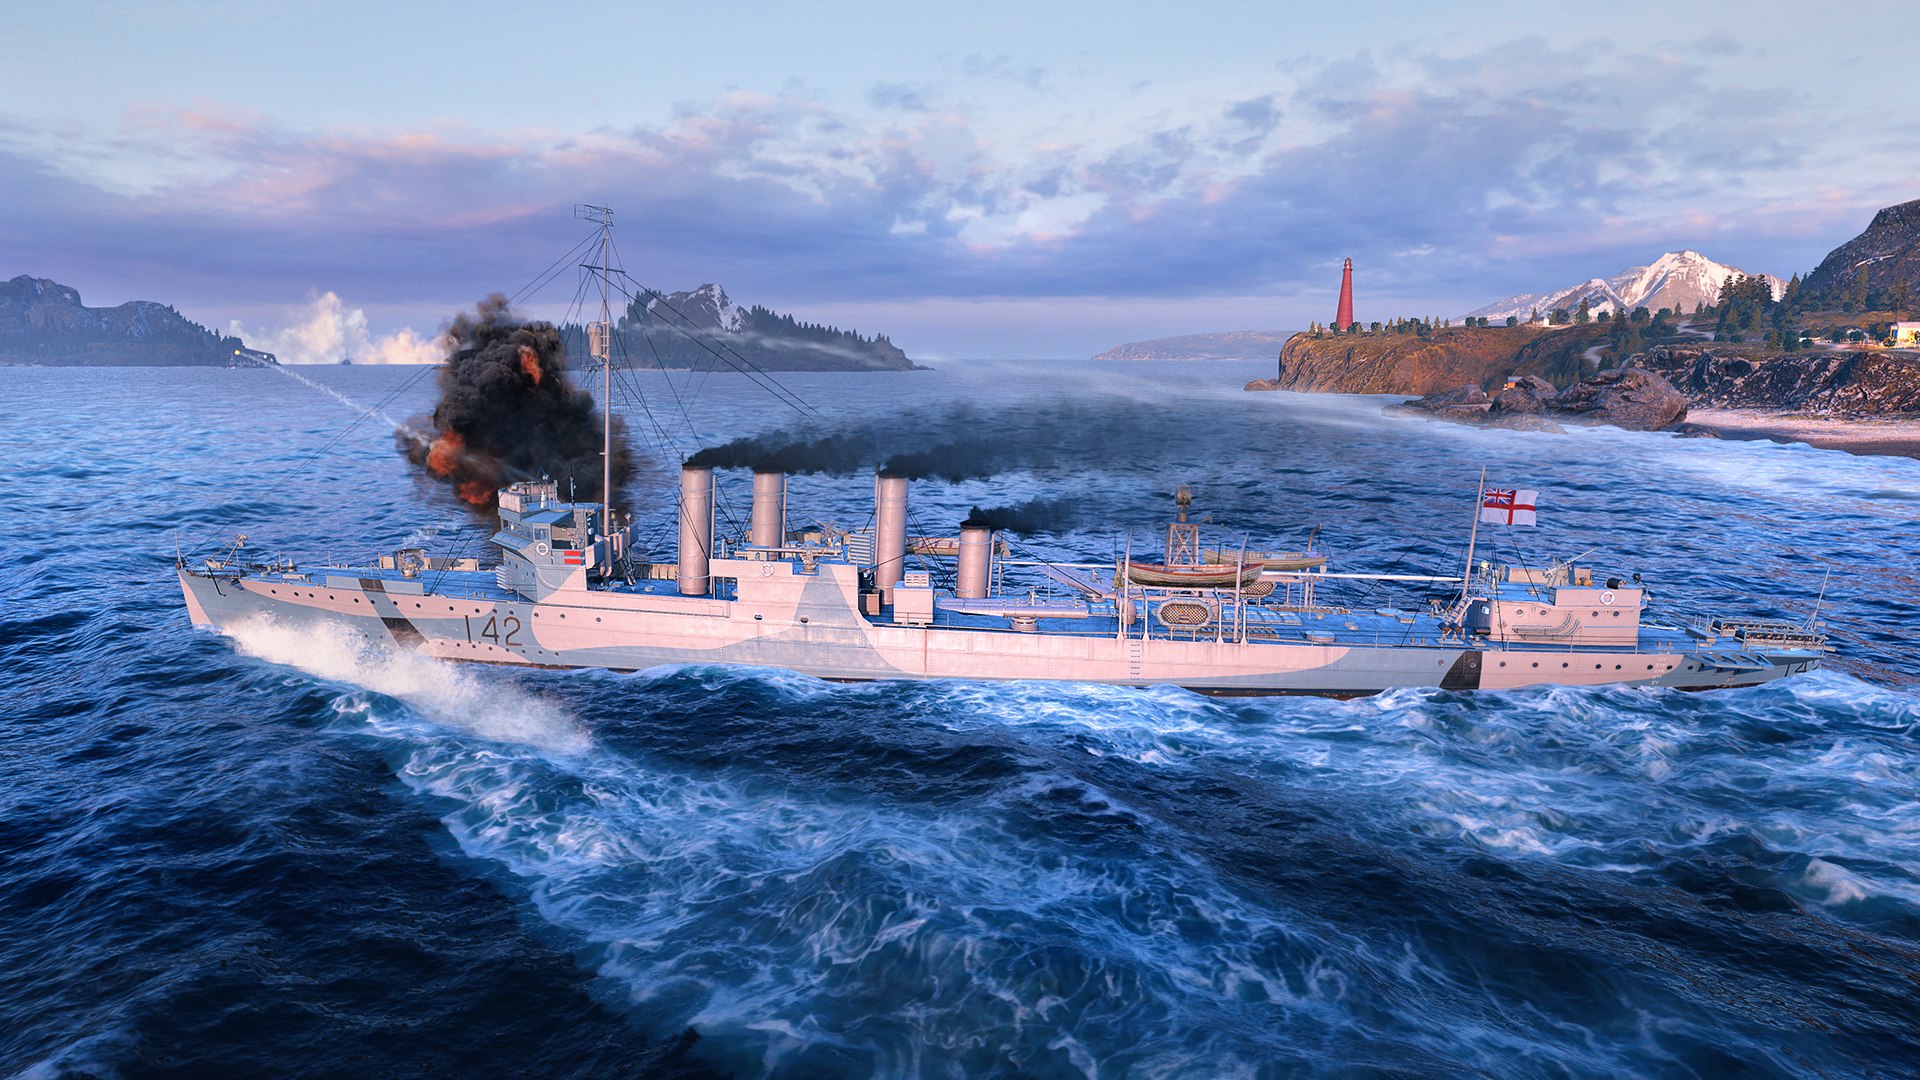 world of warships legends ps4 update